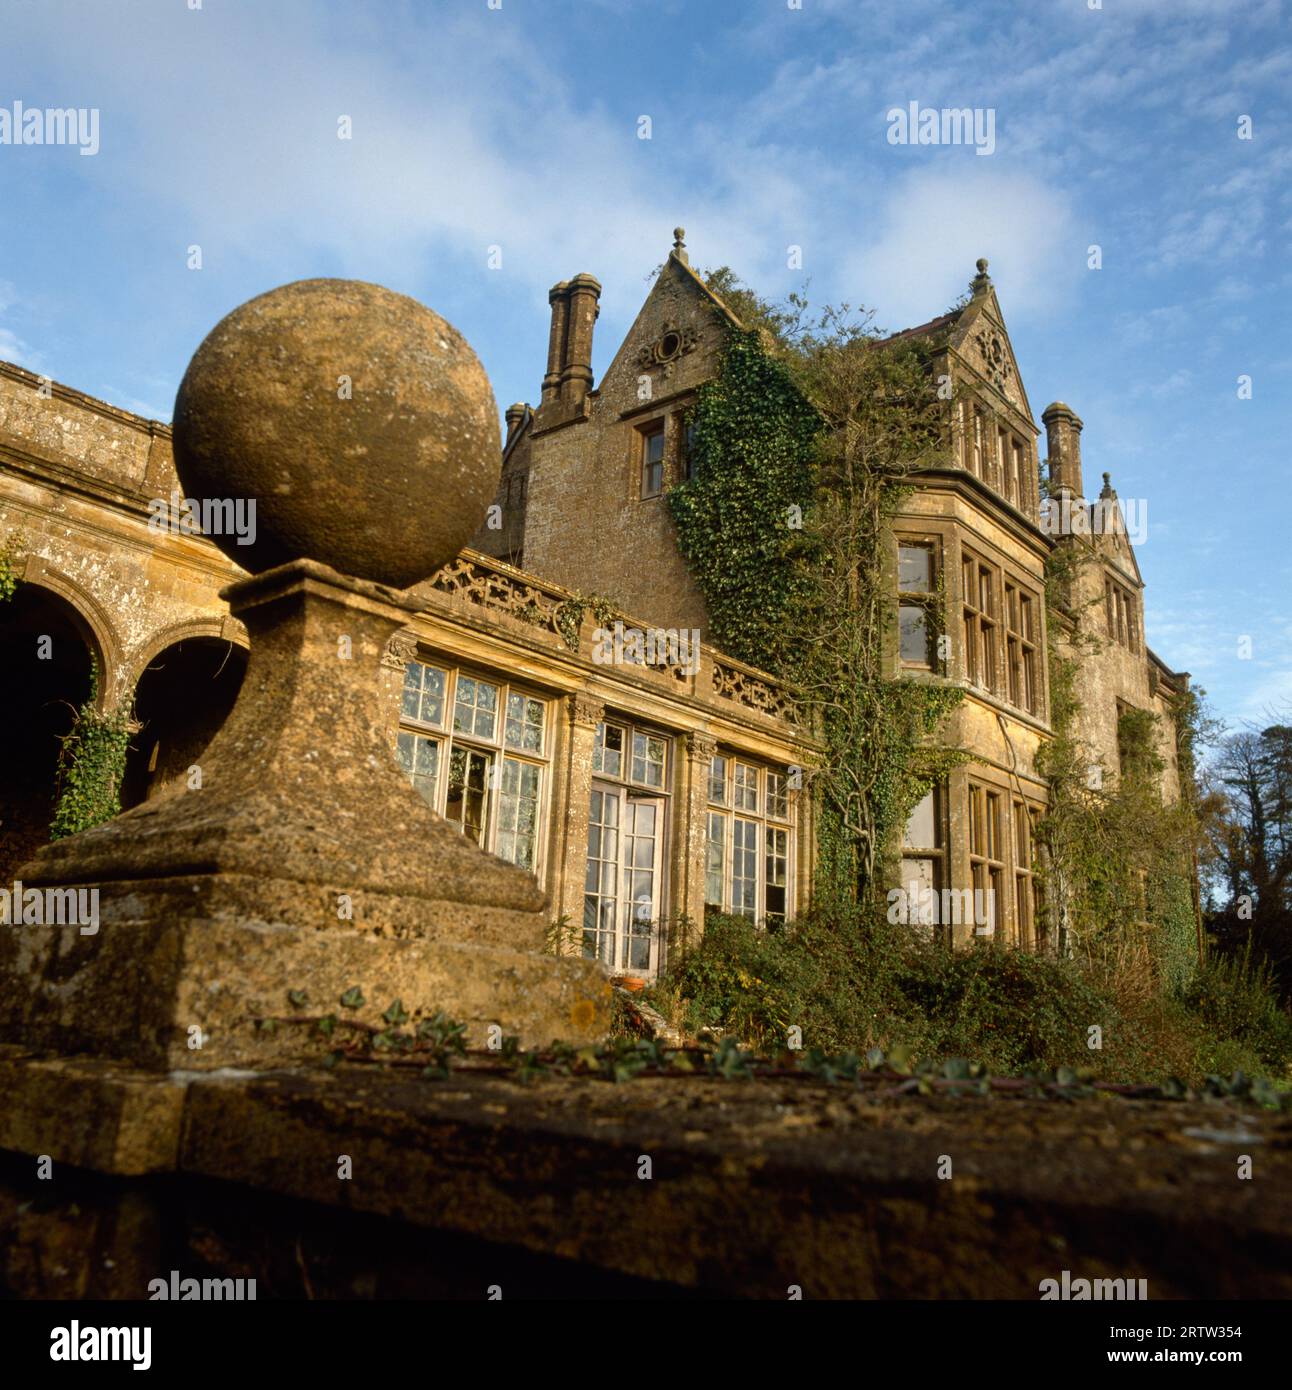 Grand country house in disrepair, UK Stock Photo